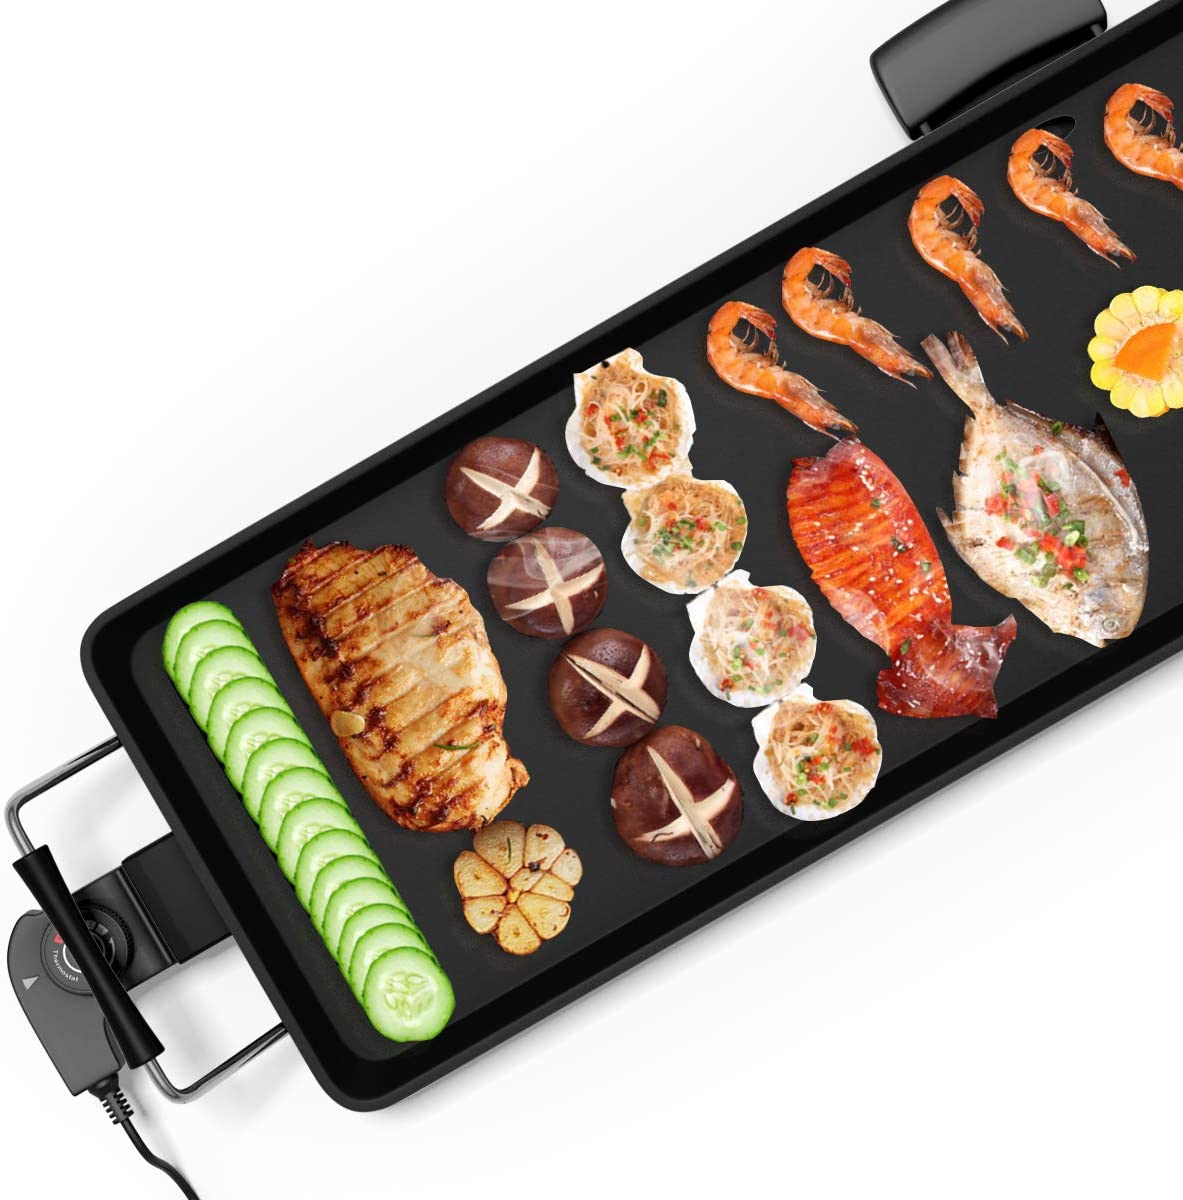  Camerons BBQ Grill Topper Grilling Pans (Set of 2) - Non-Stick  Barbecue Trays w Stainless Steel Handles- Indoor Outdoor use for Meat,  Vegetables & Seafood -Holiday Party Exchange & Christmas Gift